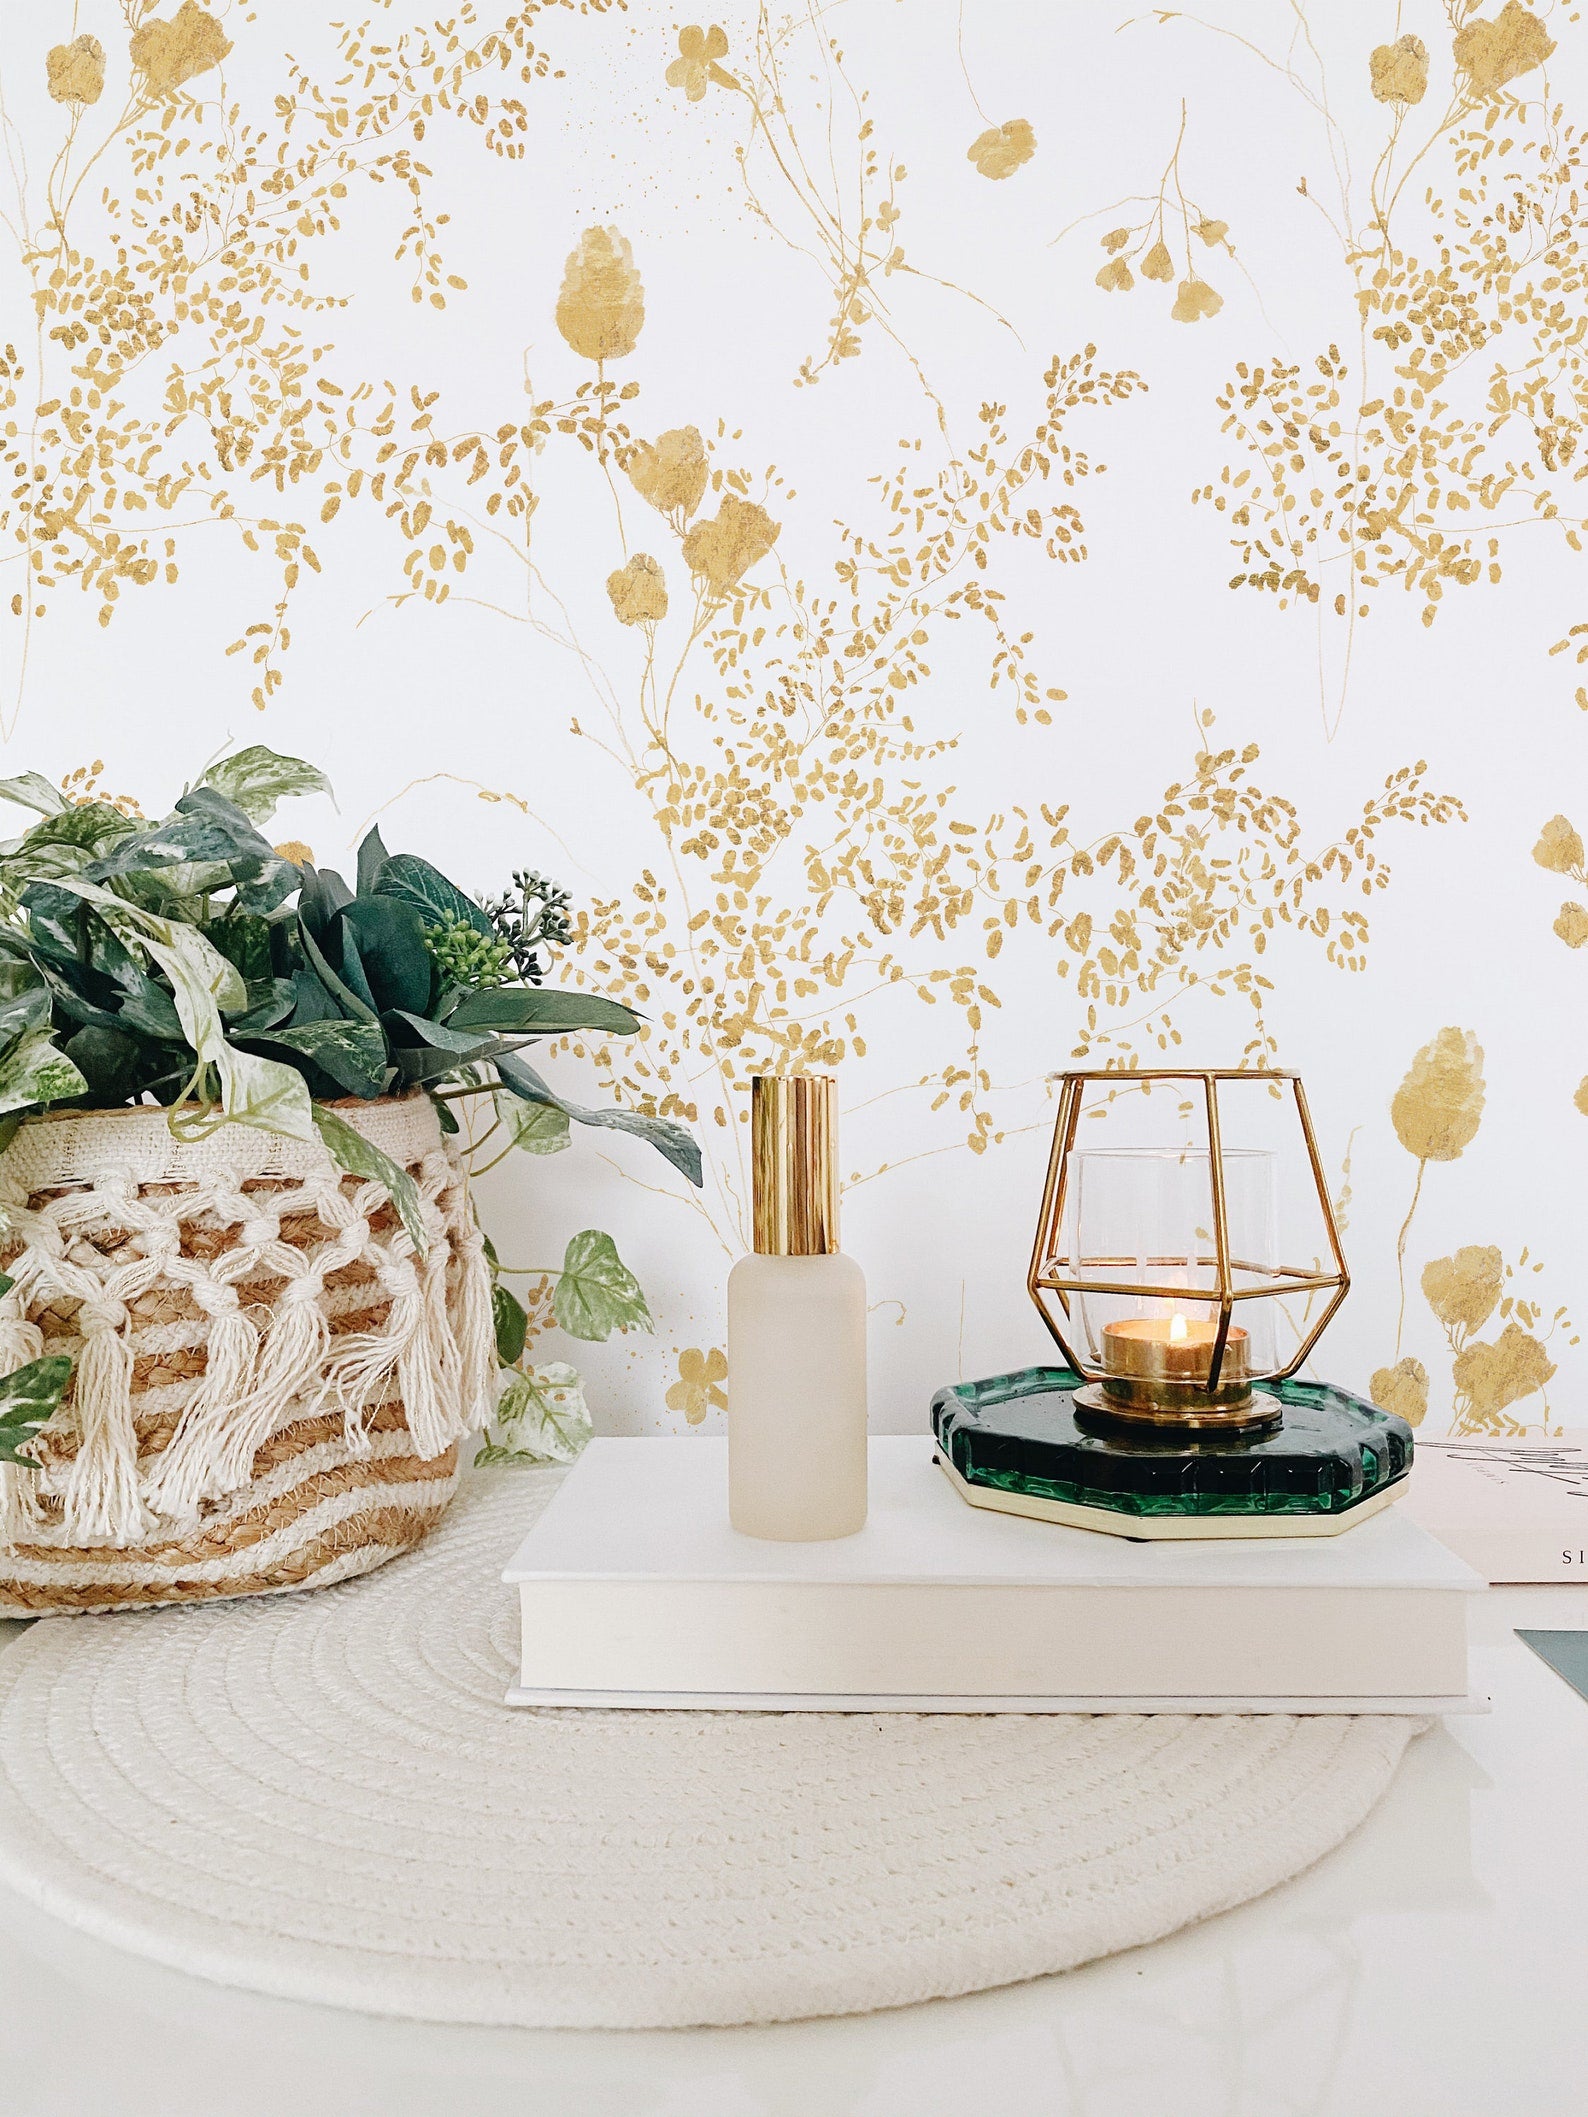 A stylish corner of a room featuring a wall adorned with Gold Floral Bunches Wallpaper, complemented by a woven planter with lush greenery and chic gold and glass decor accents.